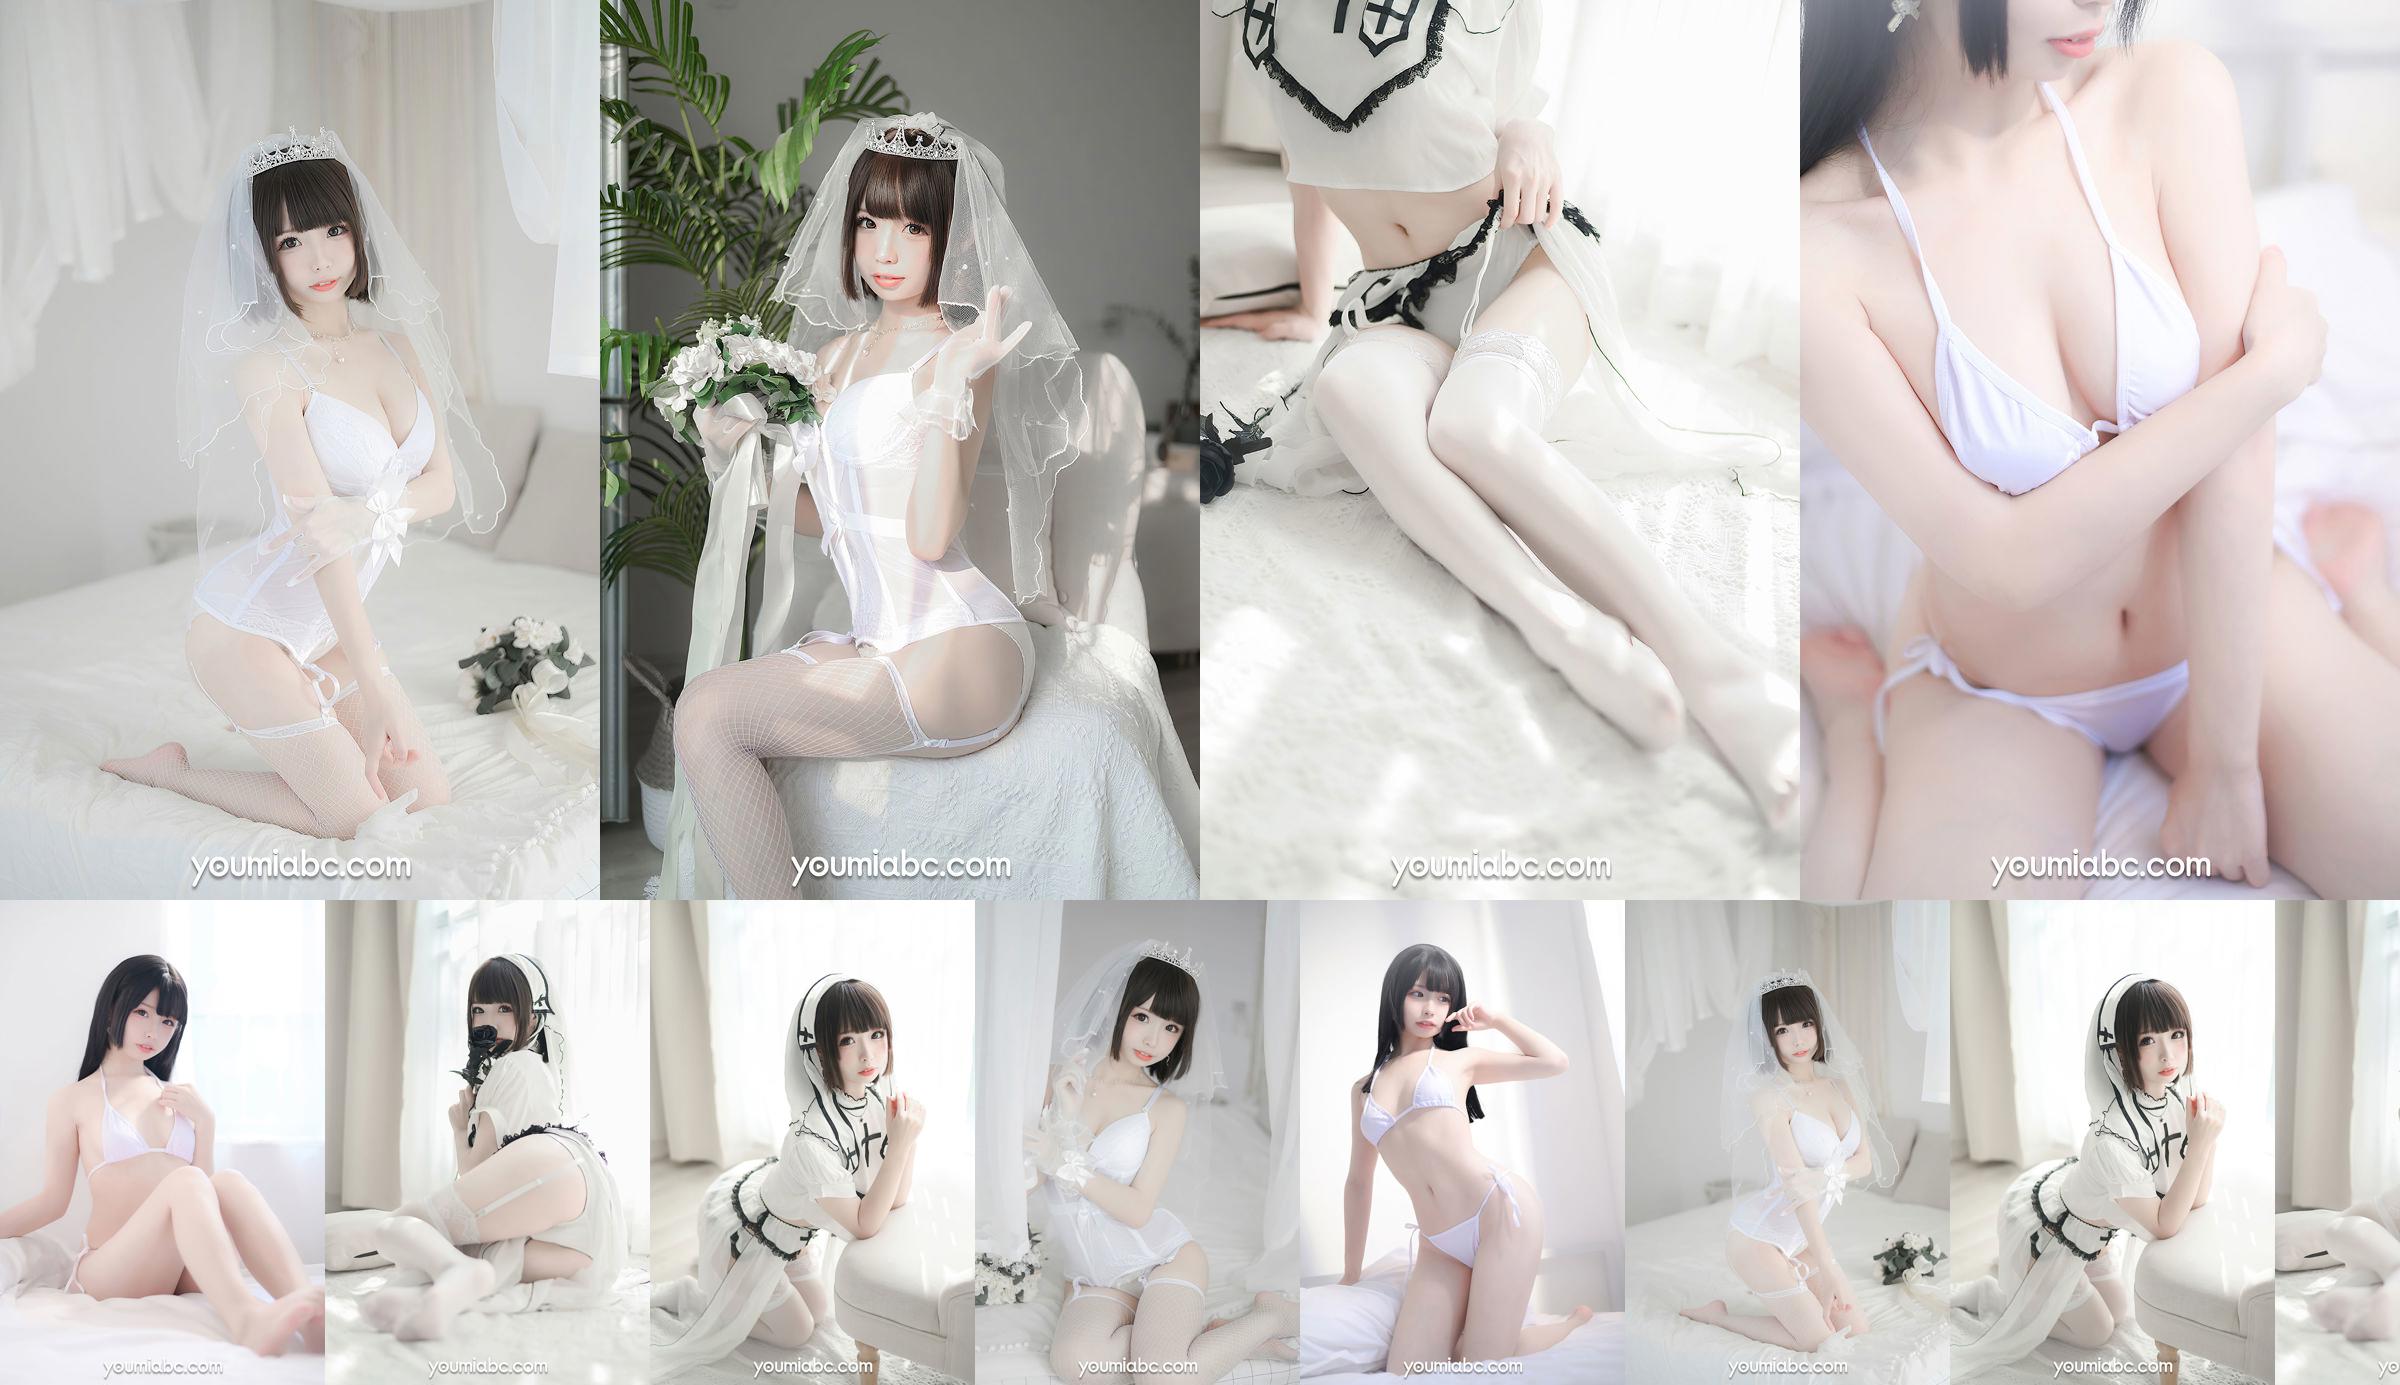 [YouMi YouMi] Sweet Pepper Mio mio - Journal d'amour No.bdf845 Page 1